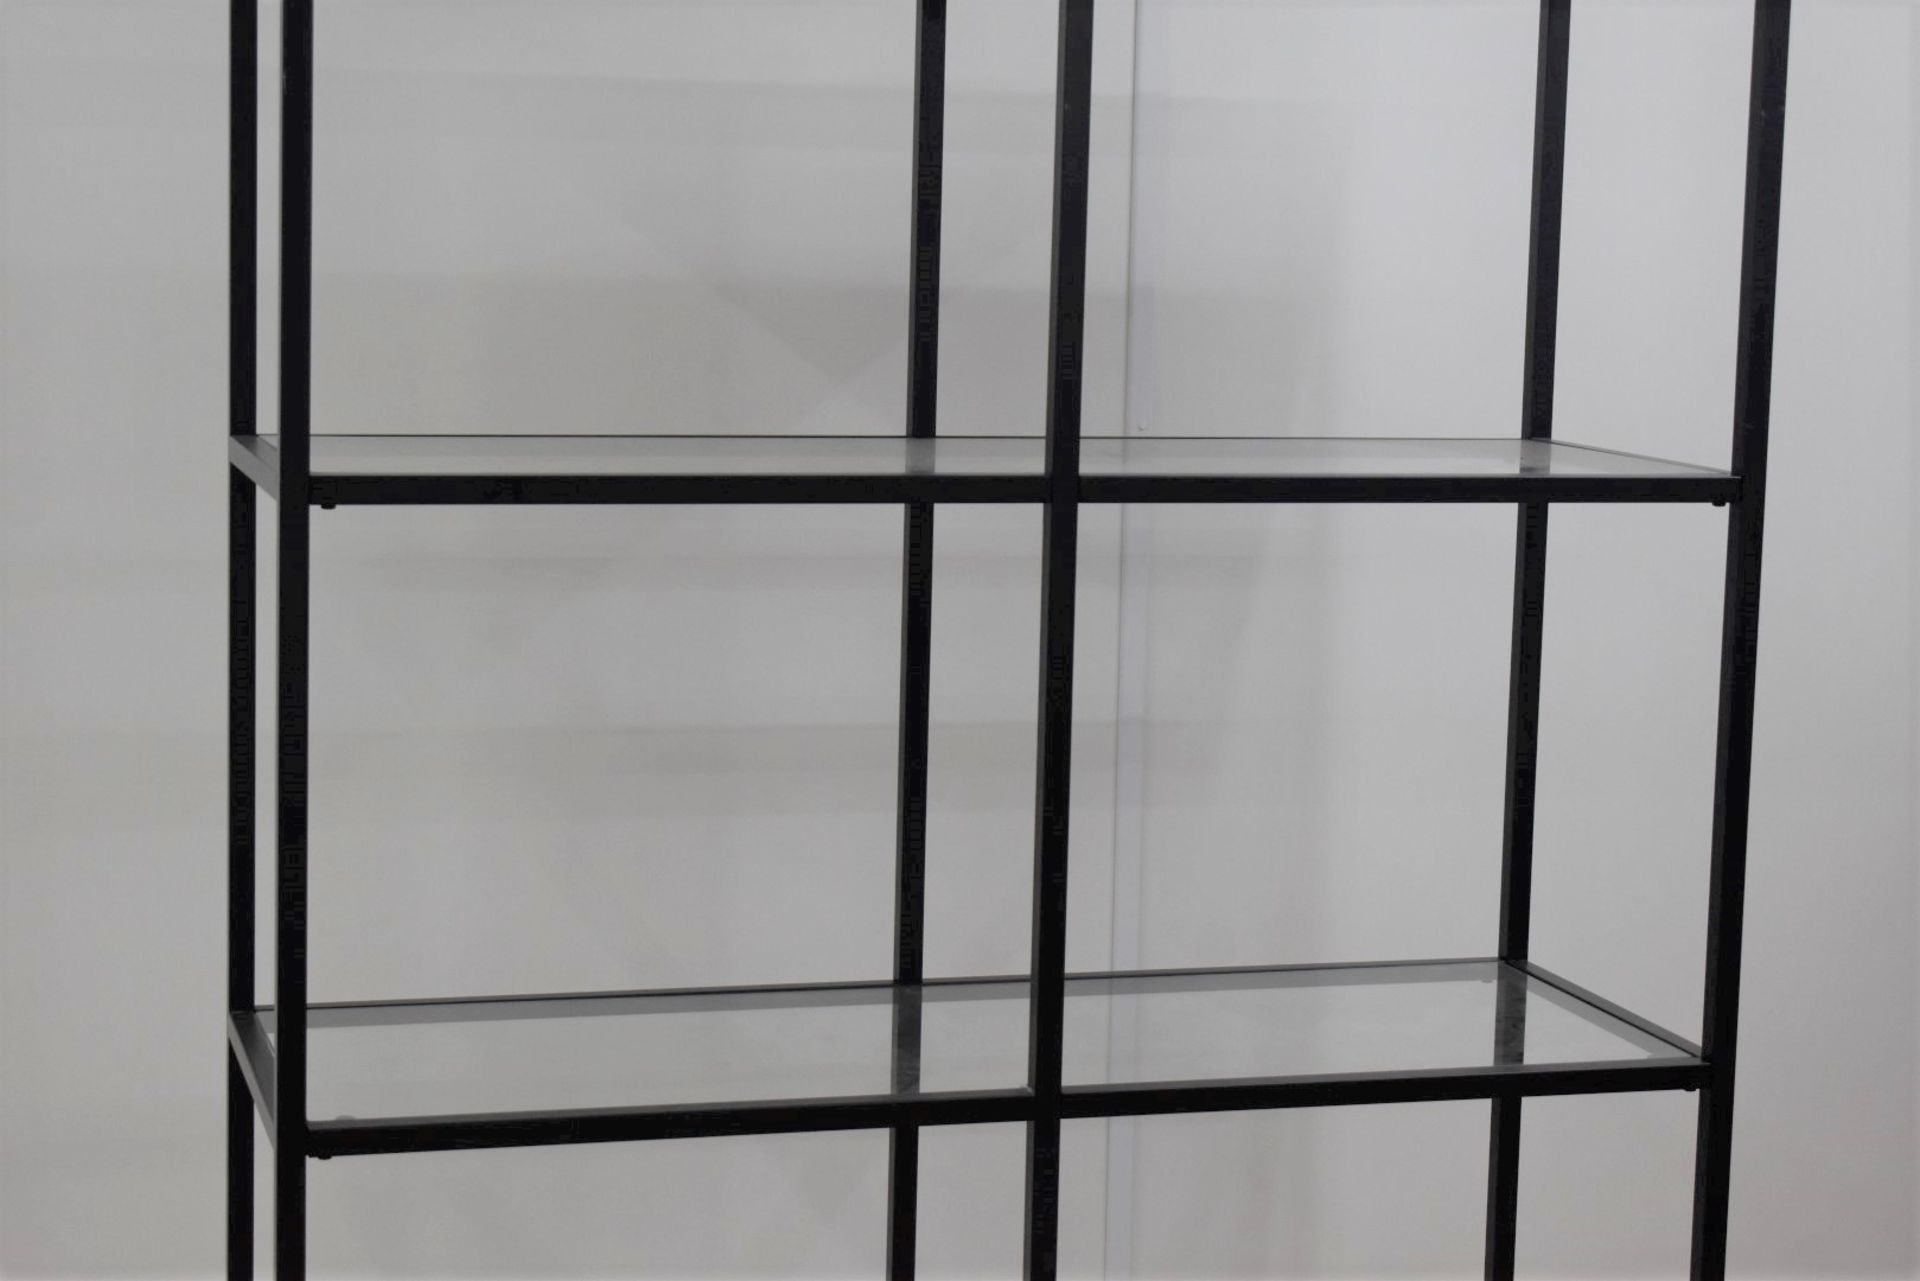 1 x Upright Modern Display Shelving Unit With Metal Frame and Glass Shelves - Image 5 of 5